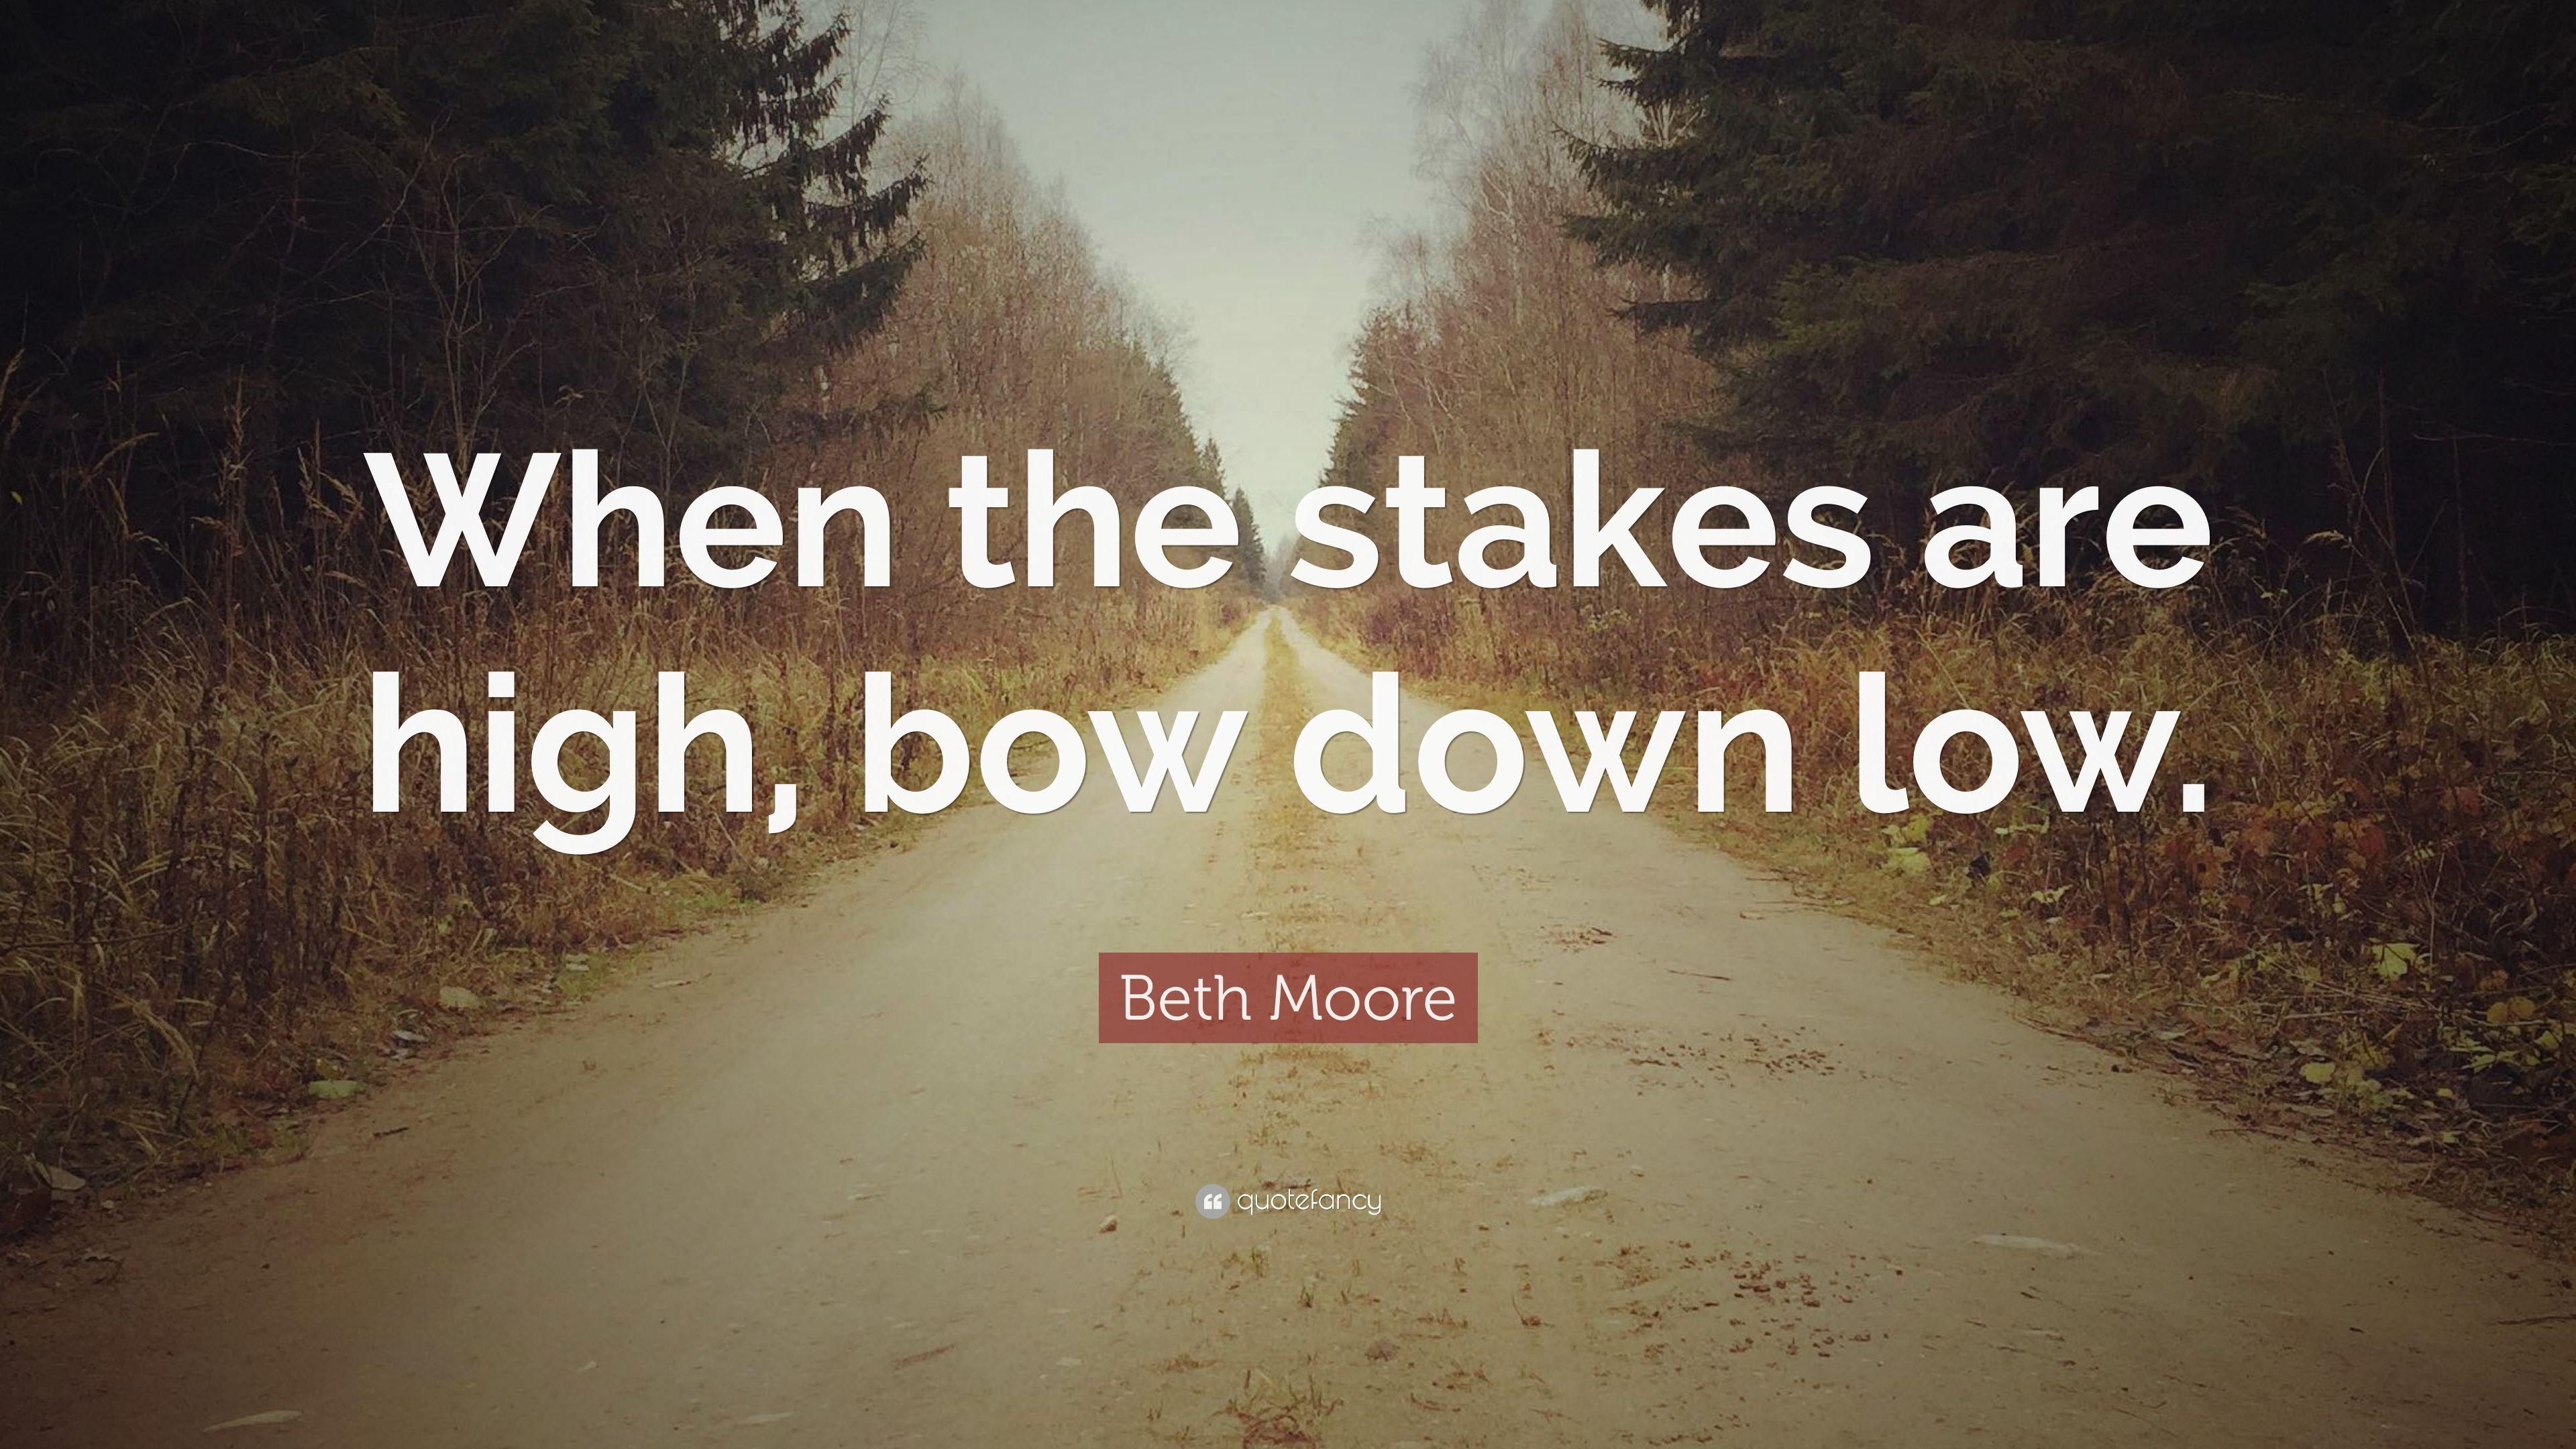 Beth Moore Quote: “When the stakes are high, bow down low.” 12